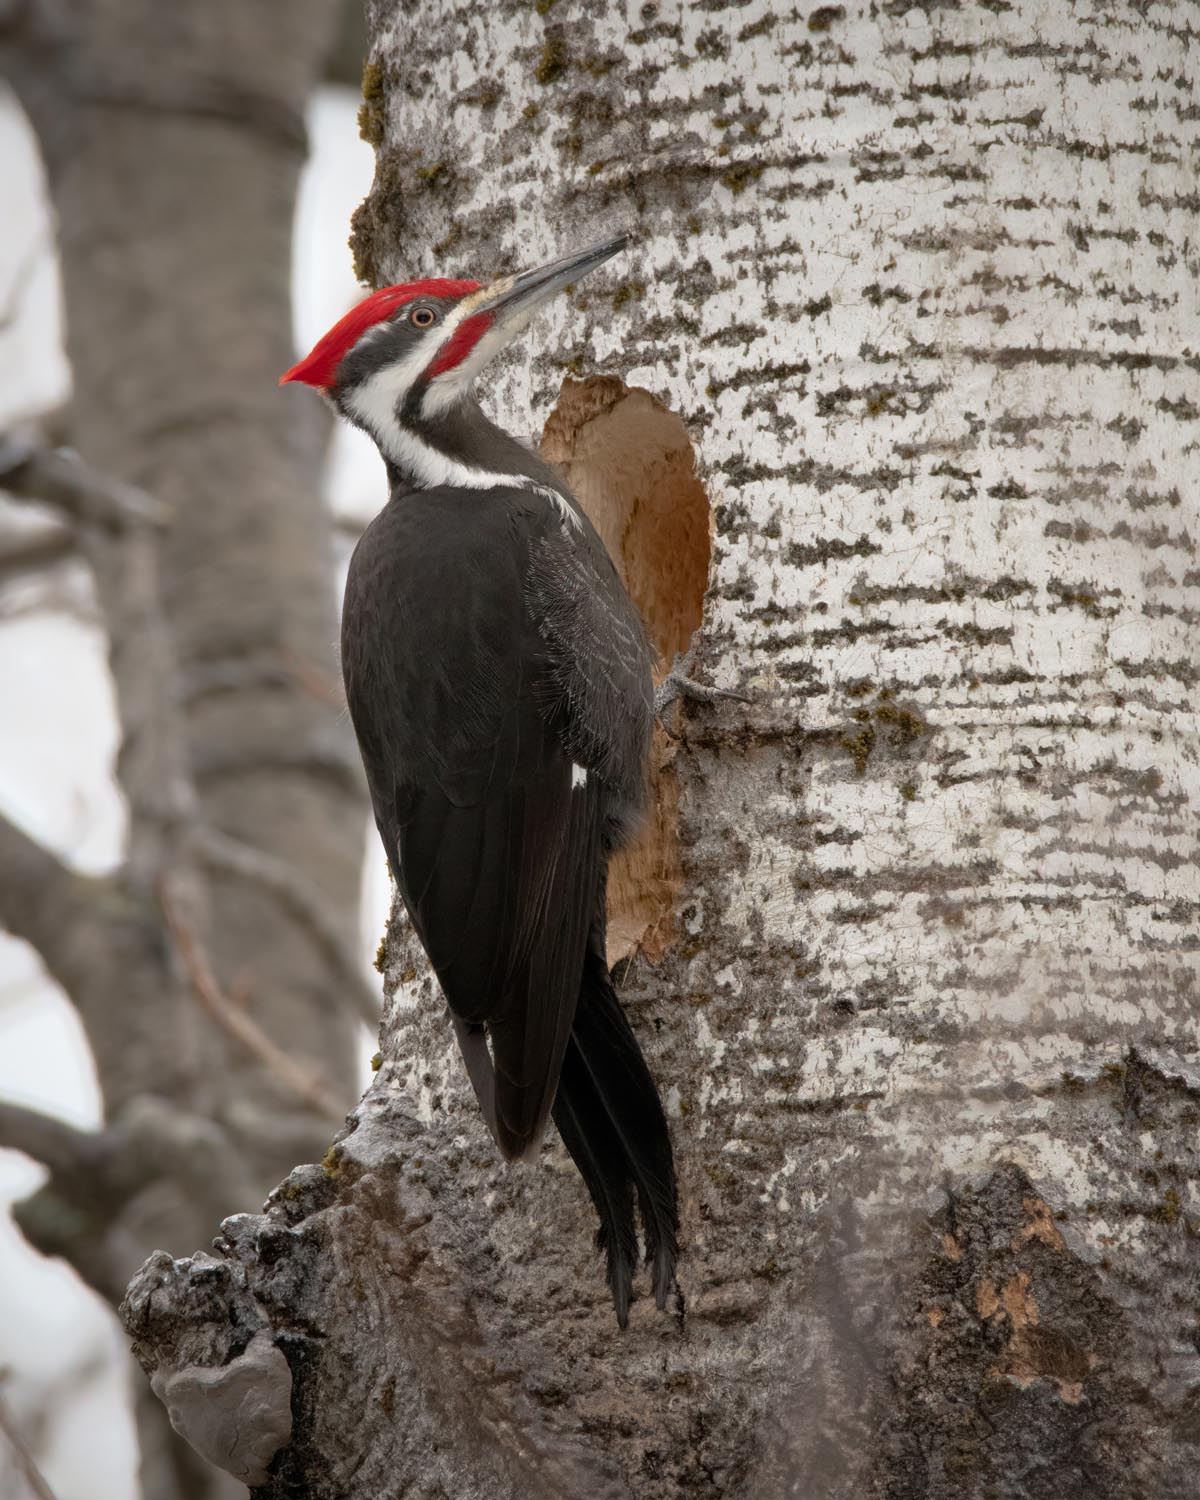 A Pileated Woodpecker pauses in the middle of excavating a cavity in the trunk of an aspen.